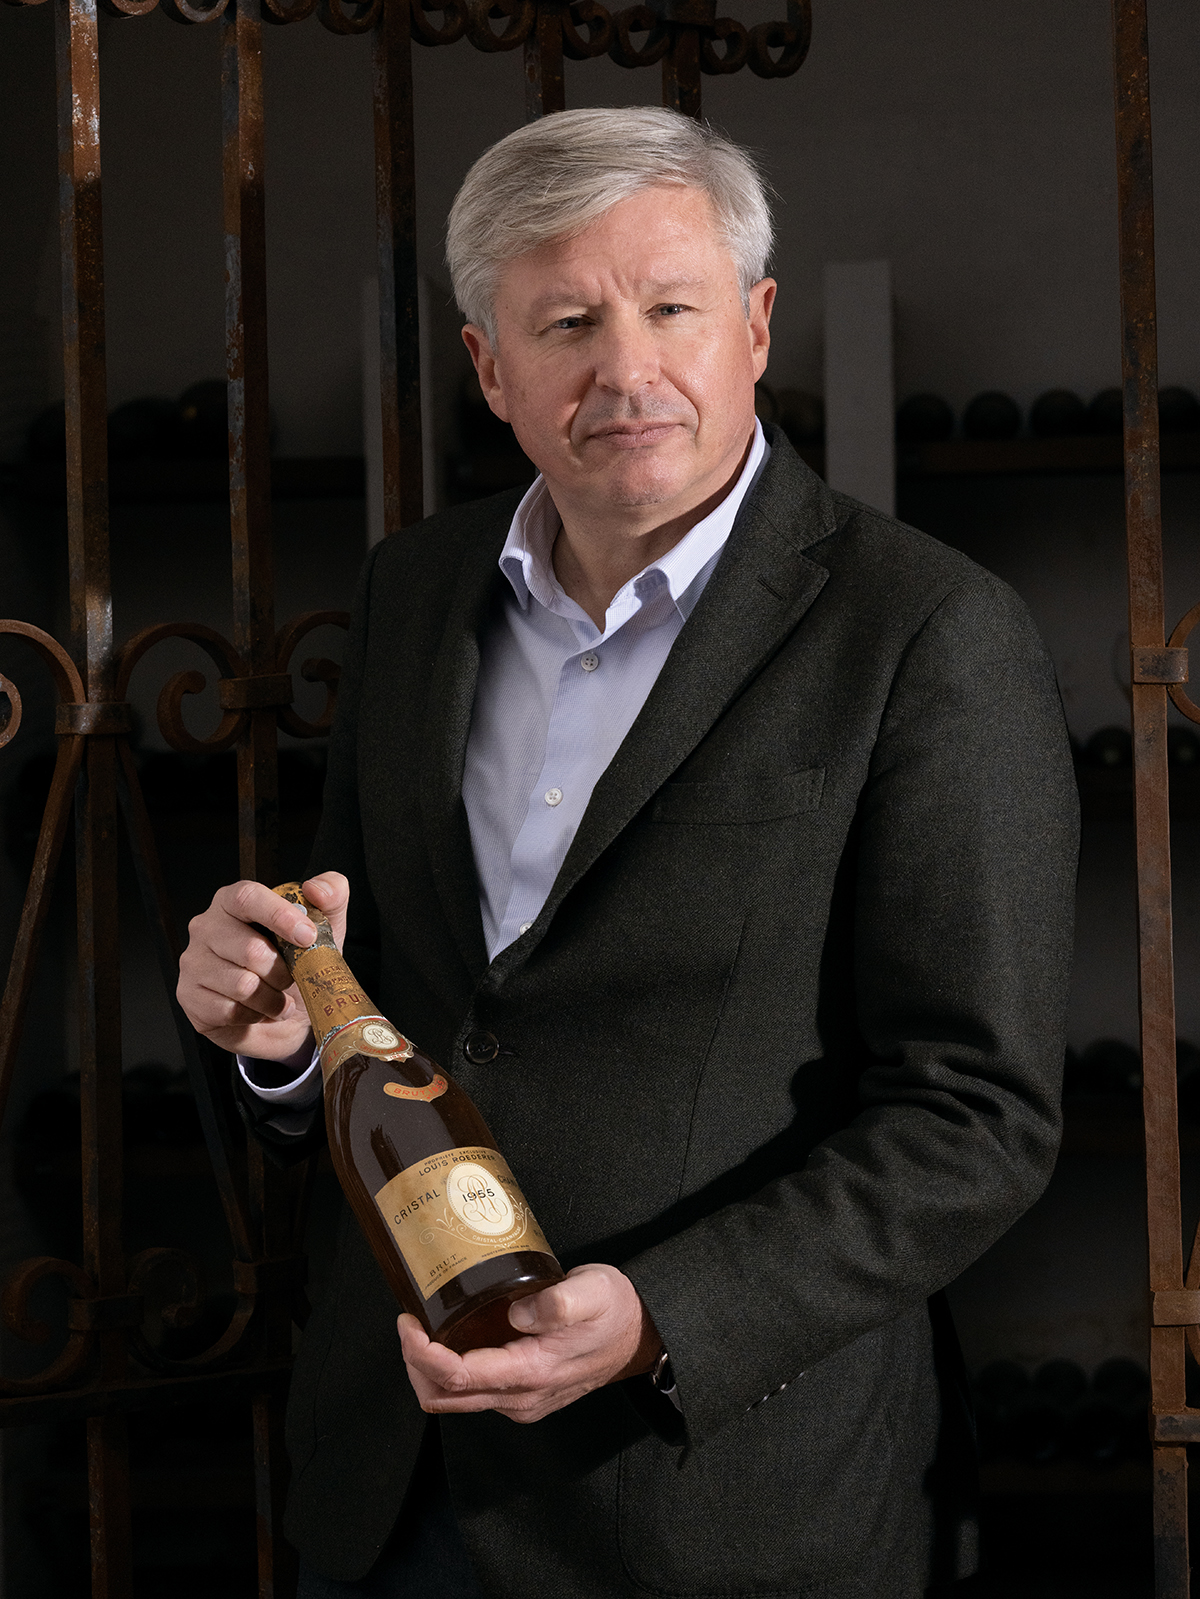 A man wearing a suit holding a bottle of champagne